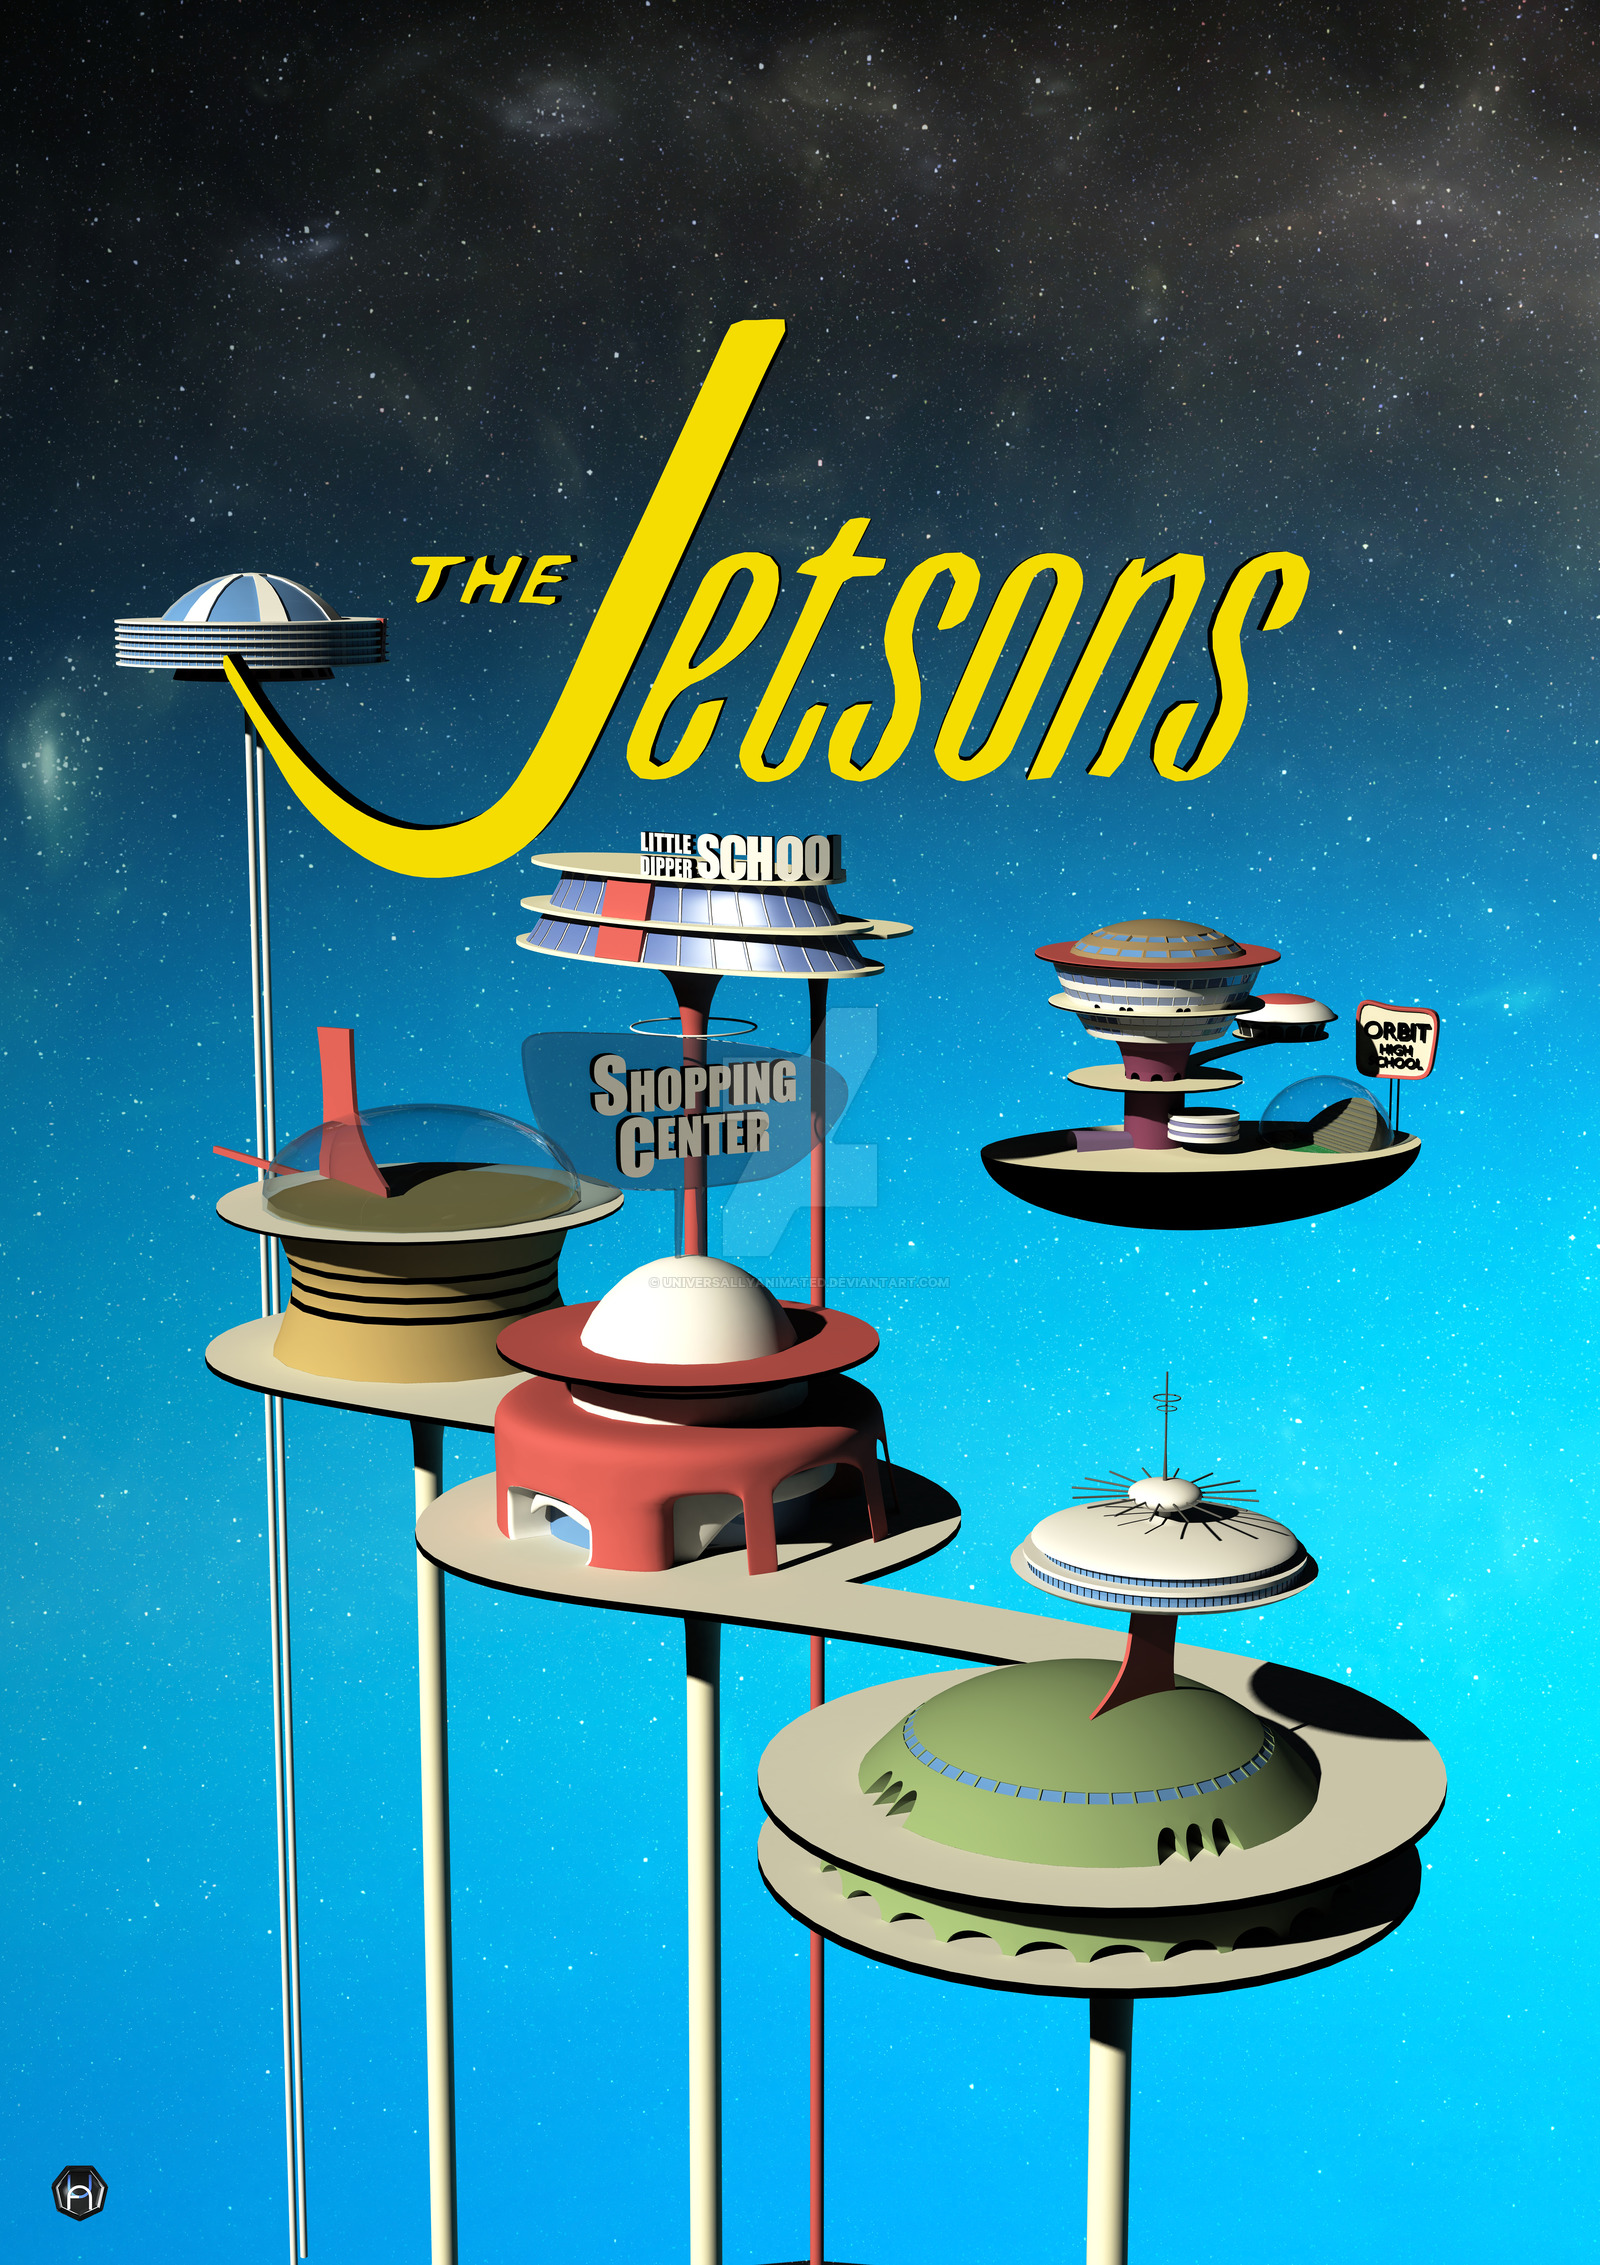 The Jetsons Poster Portrait By Universallyanimated On